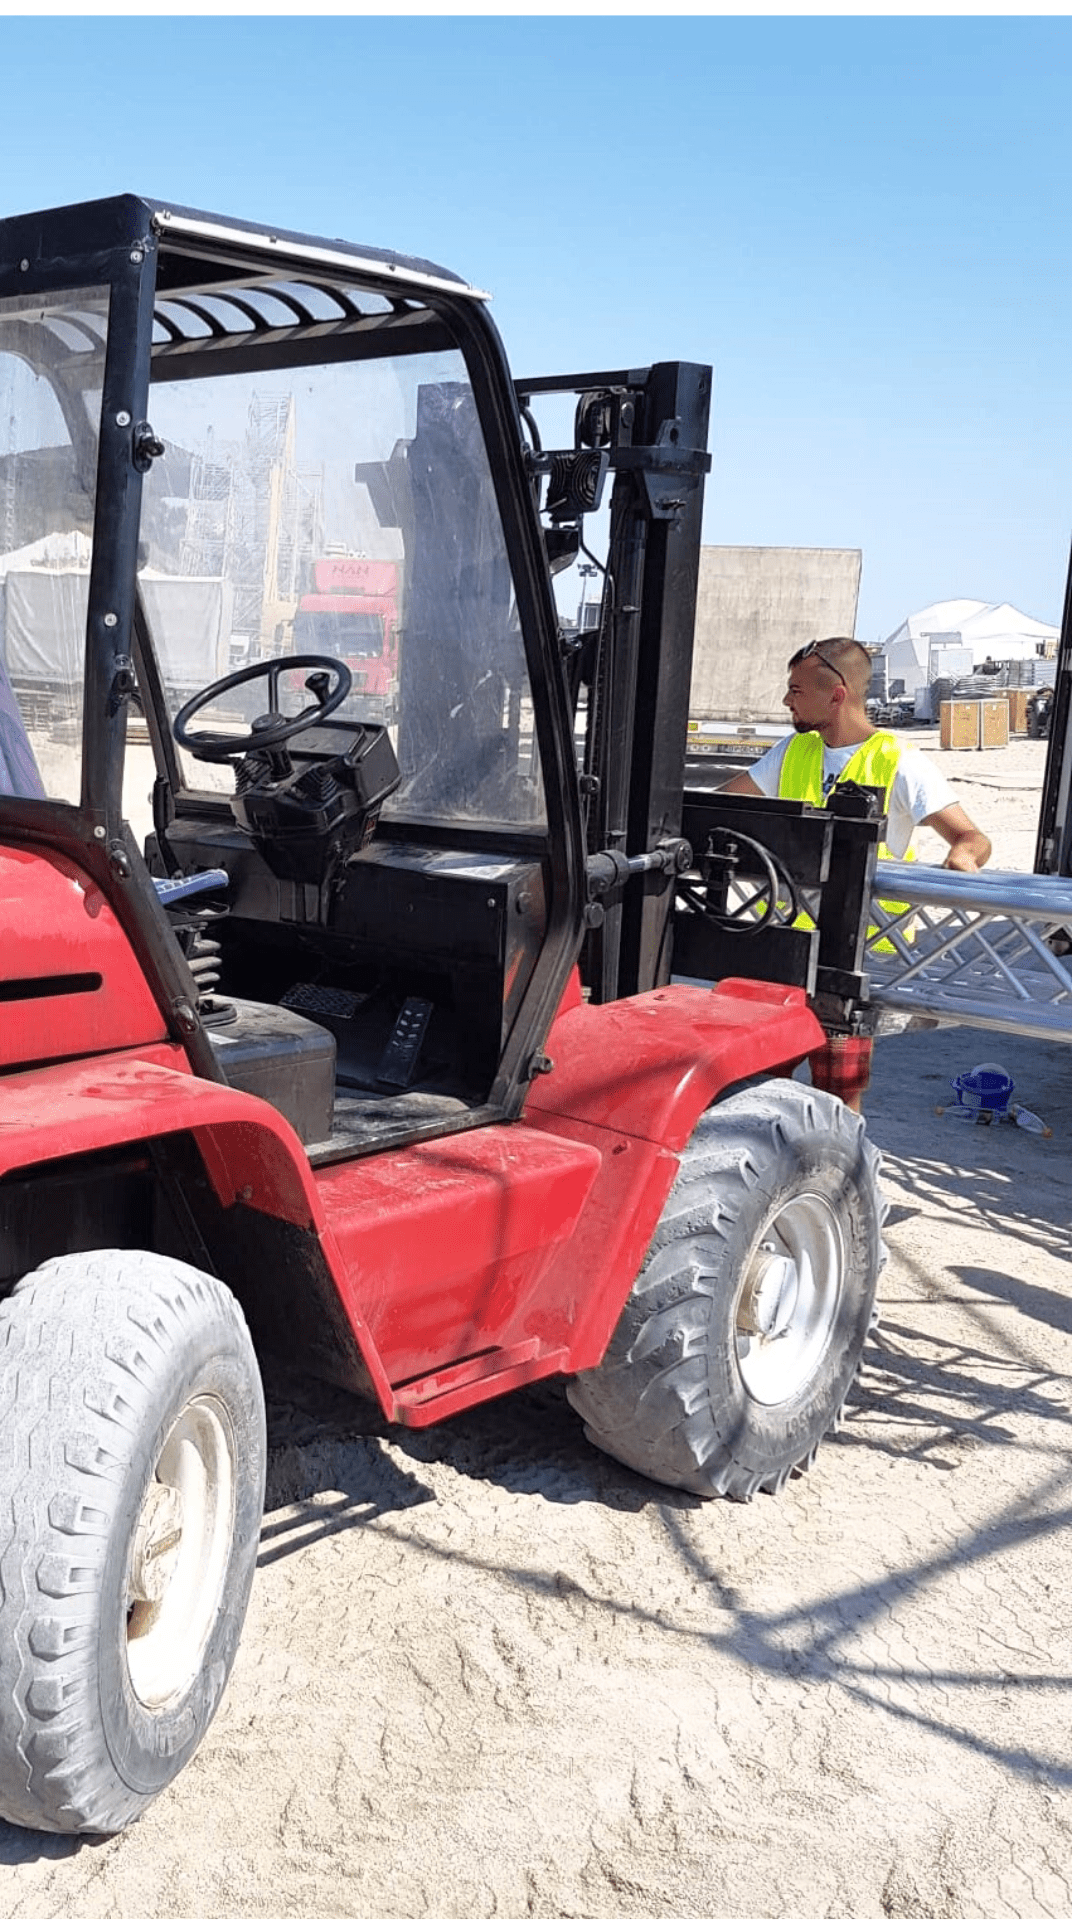 Metallic structure relocation using an all-terrain forklift